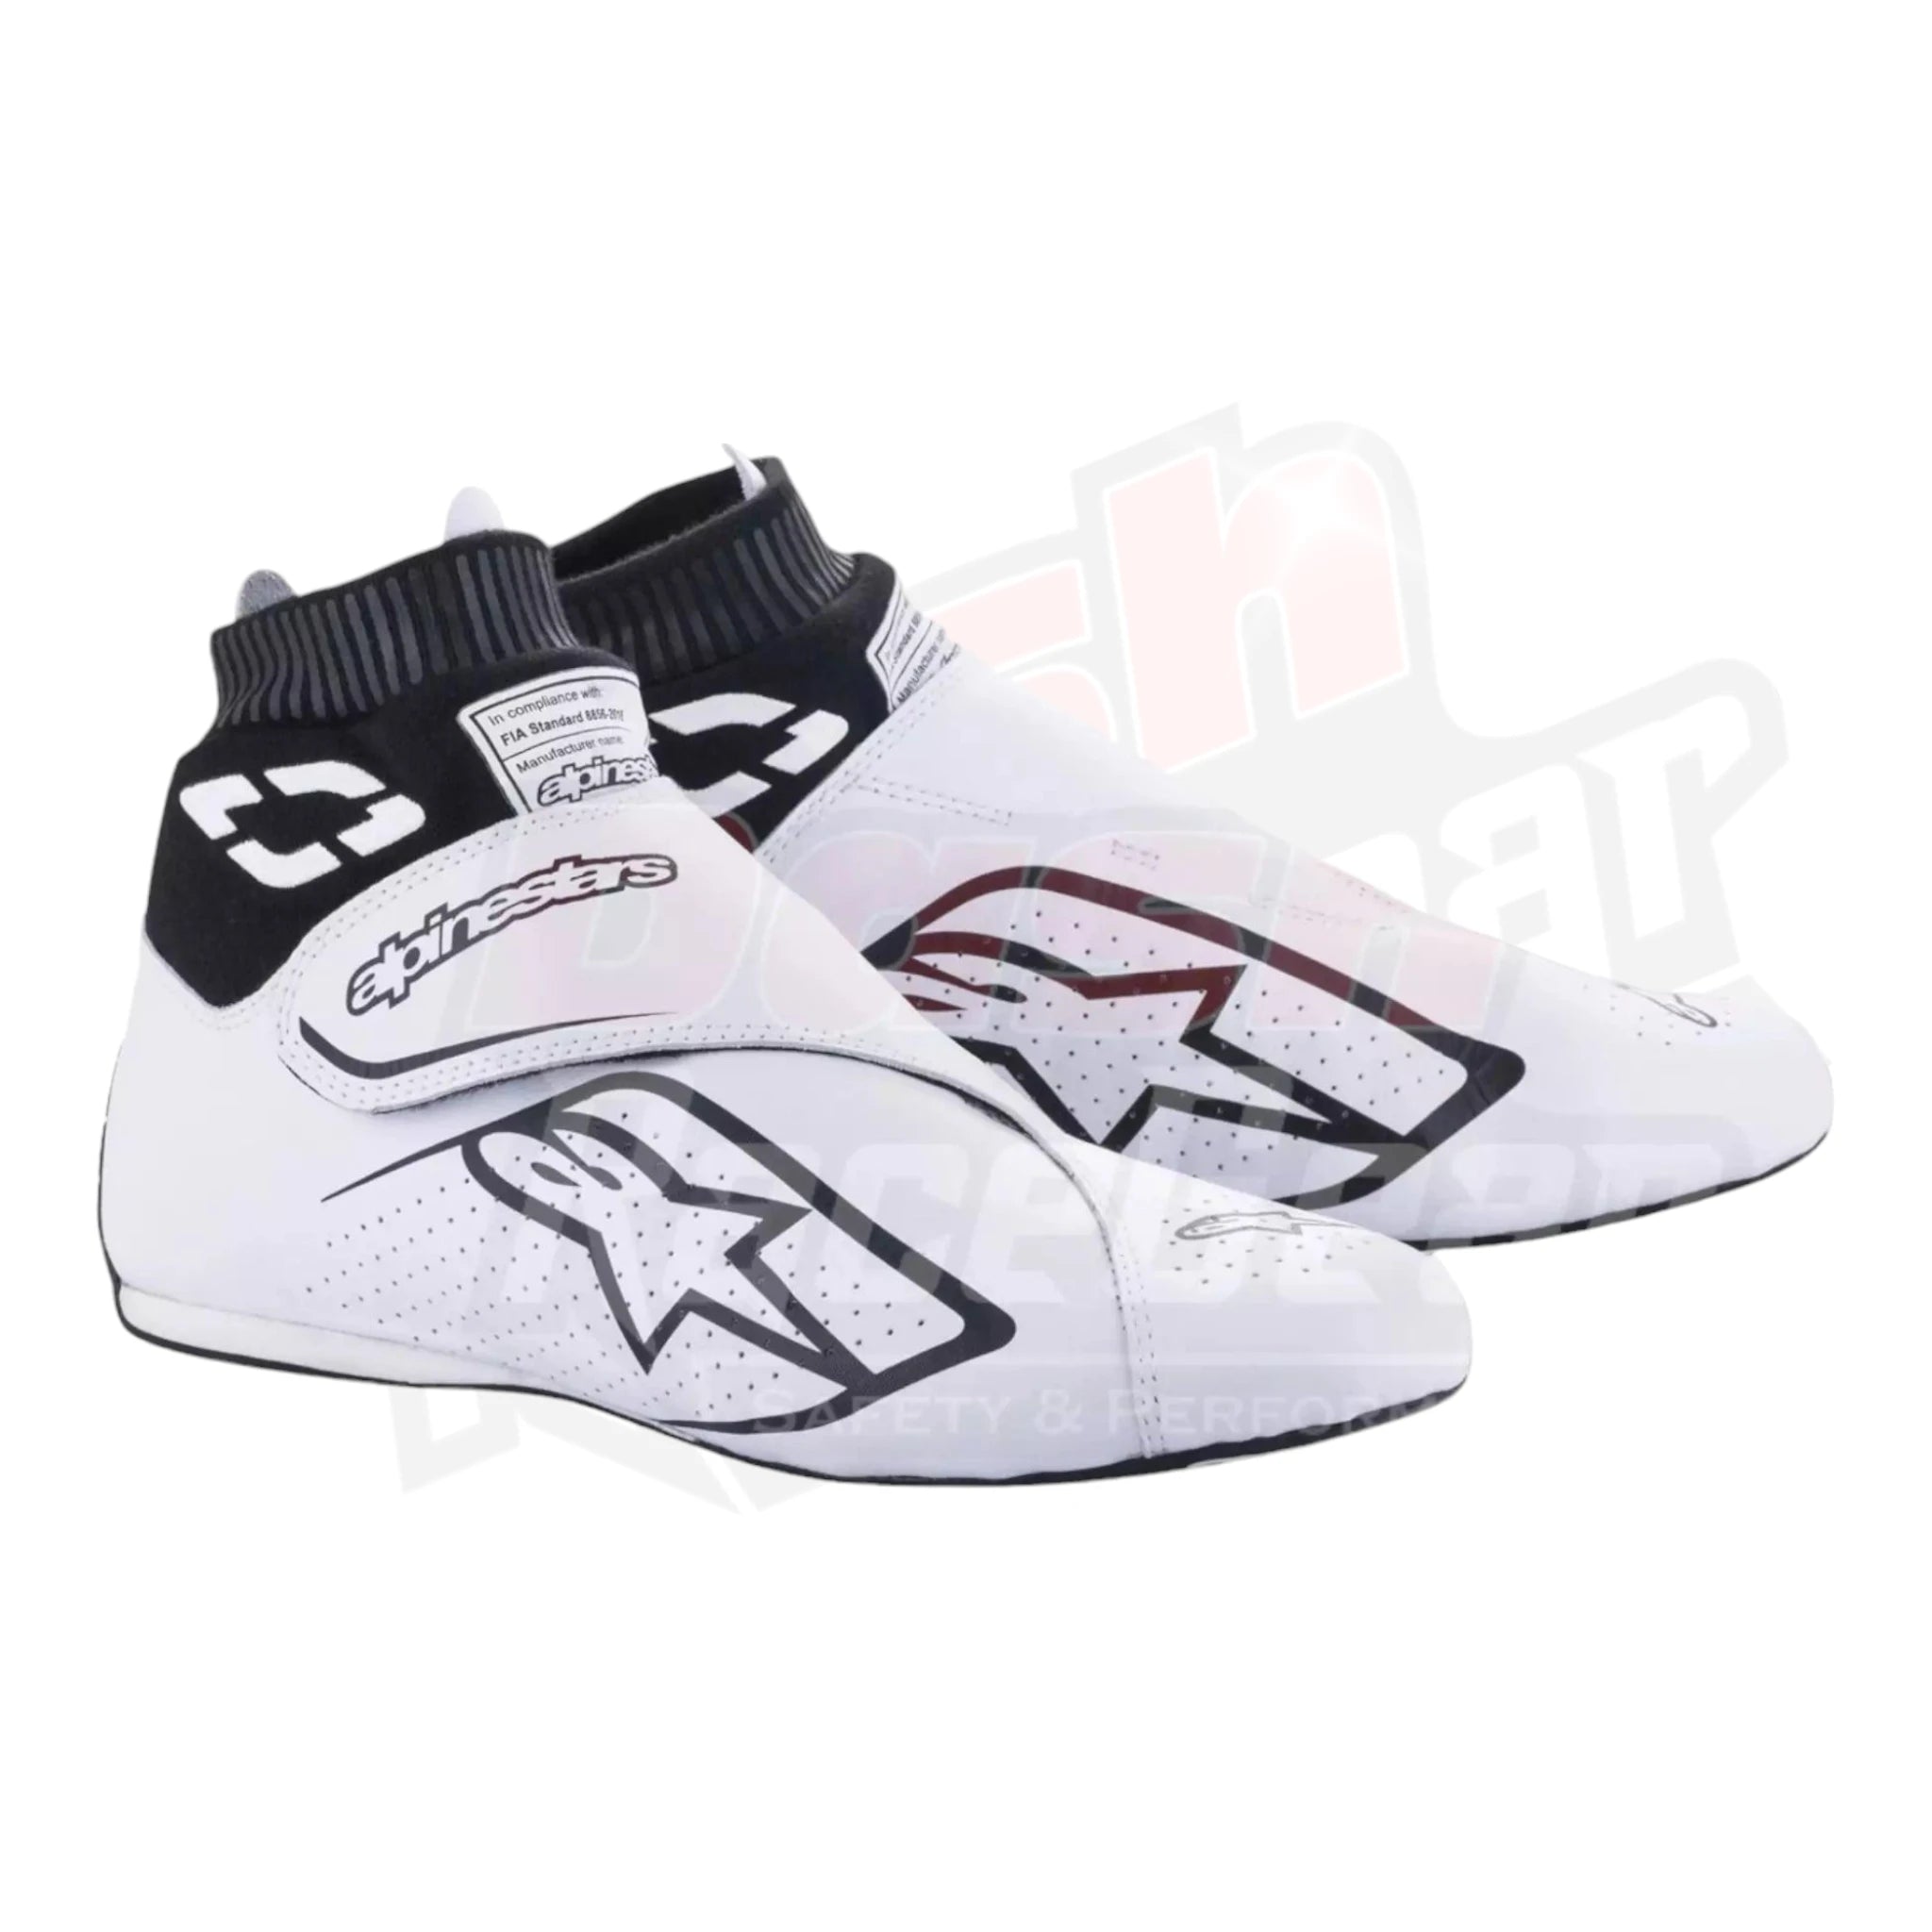 2020 George Russell Alpinestar F1 Race Boots